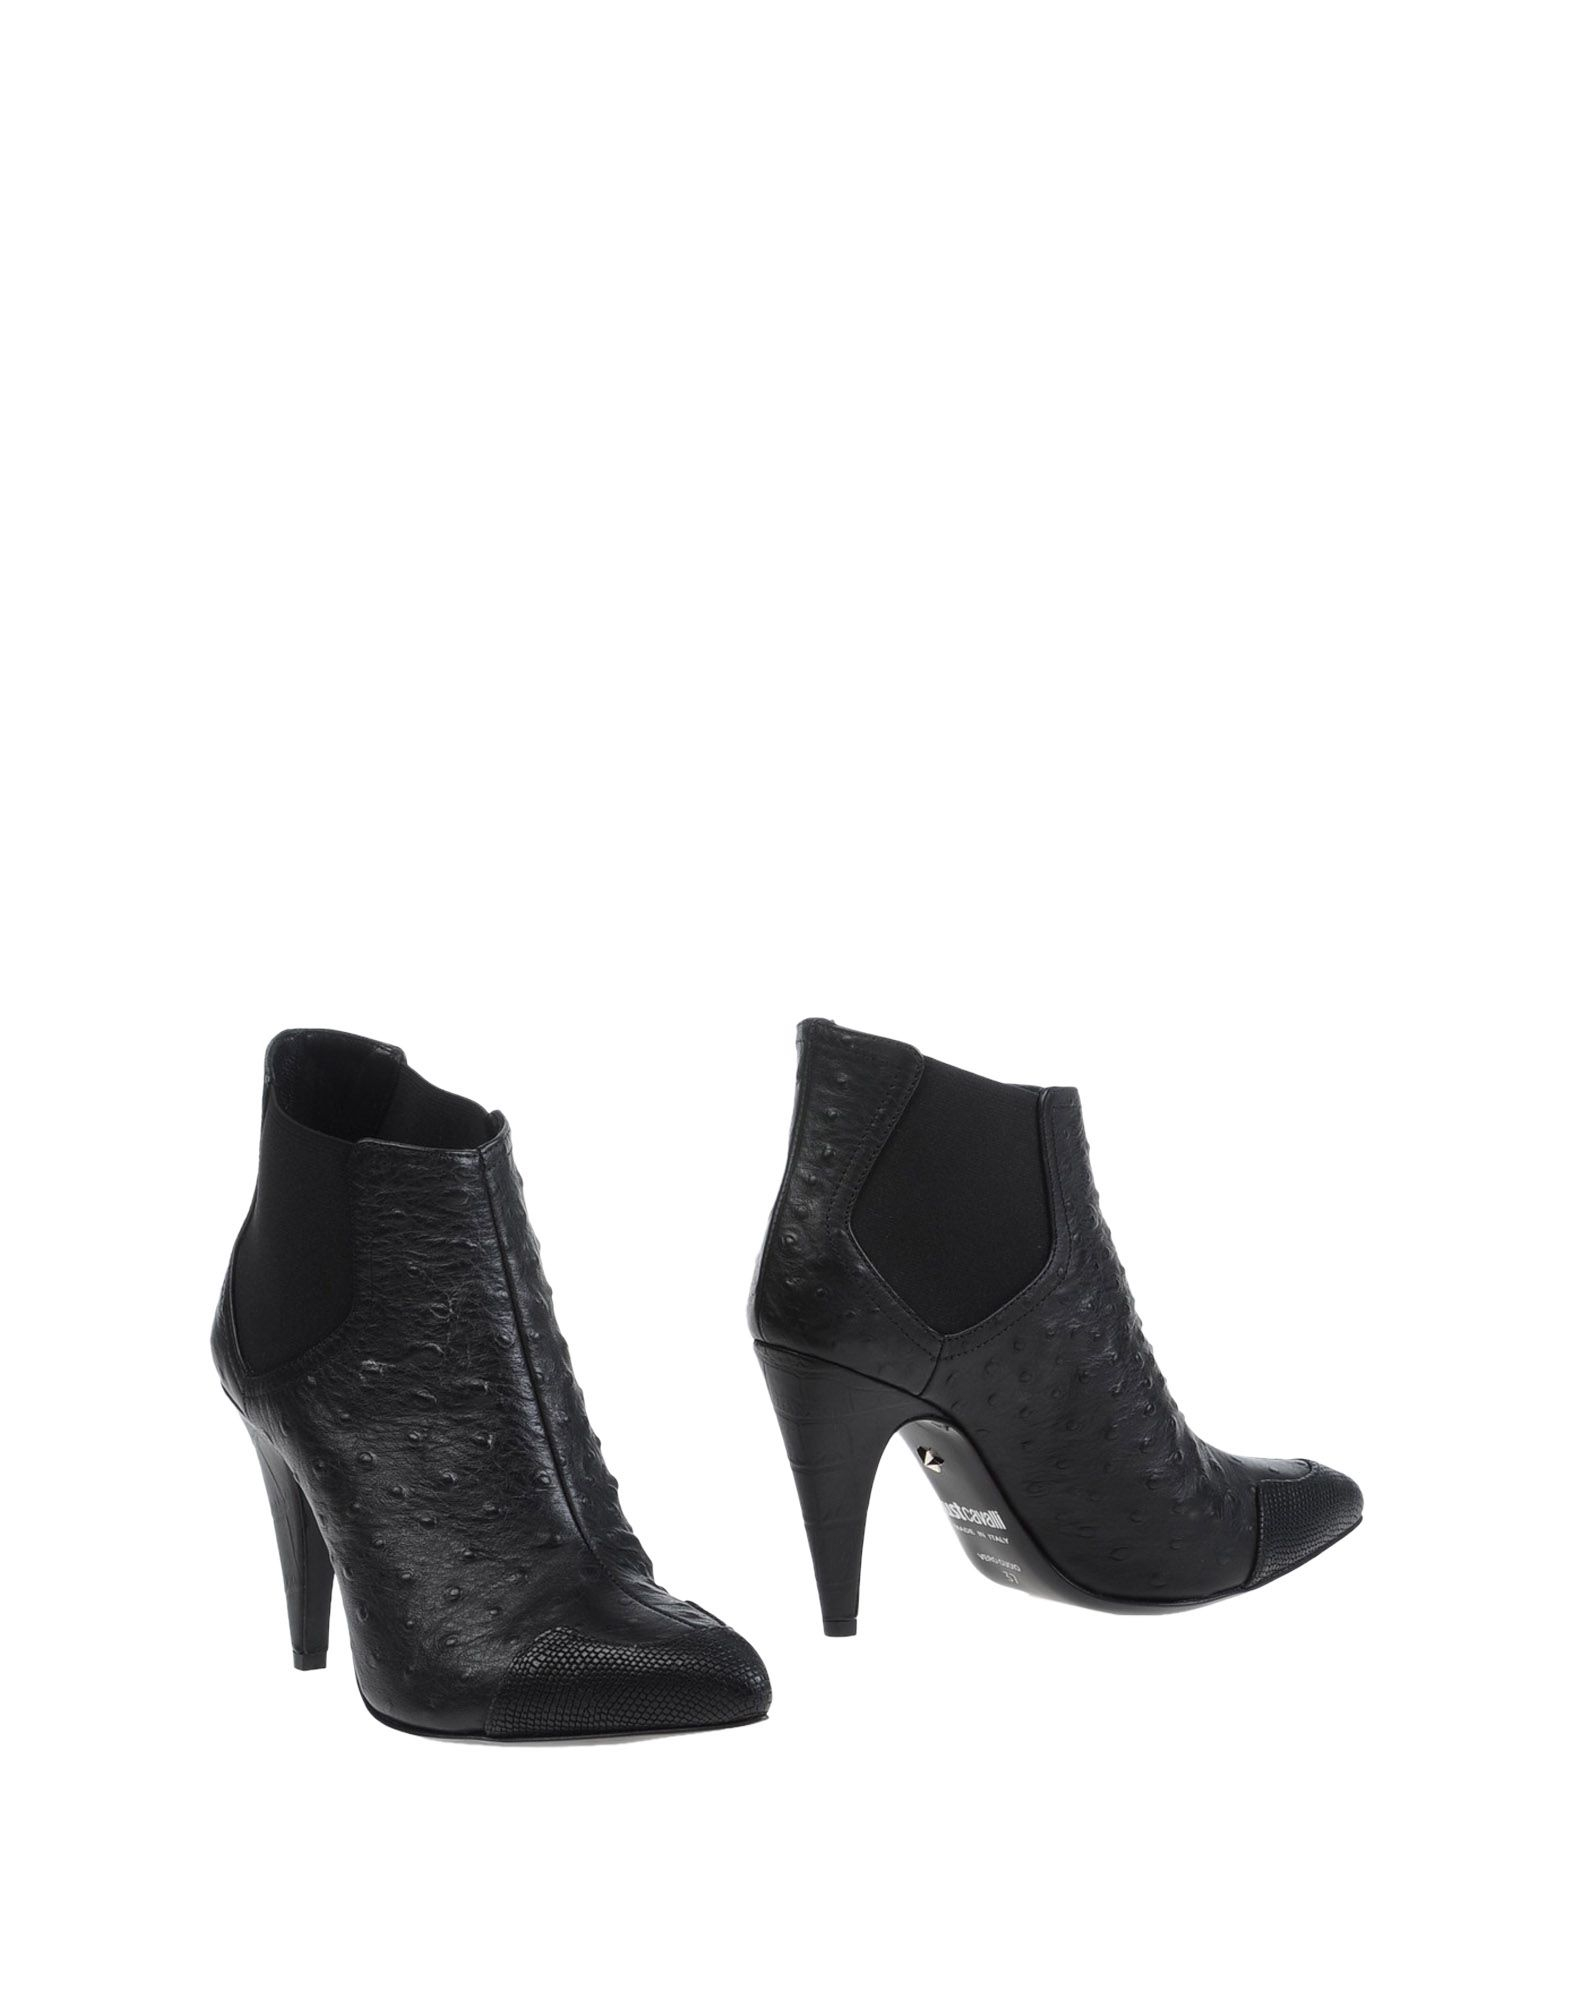 Just cavalli Shoe Boots in Black - Save 76% | Lyst